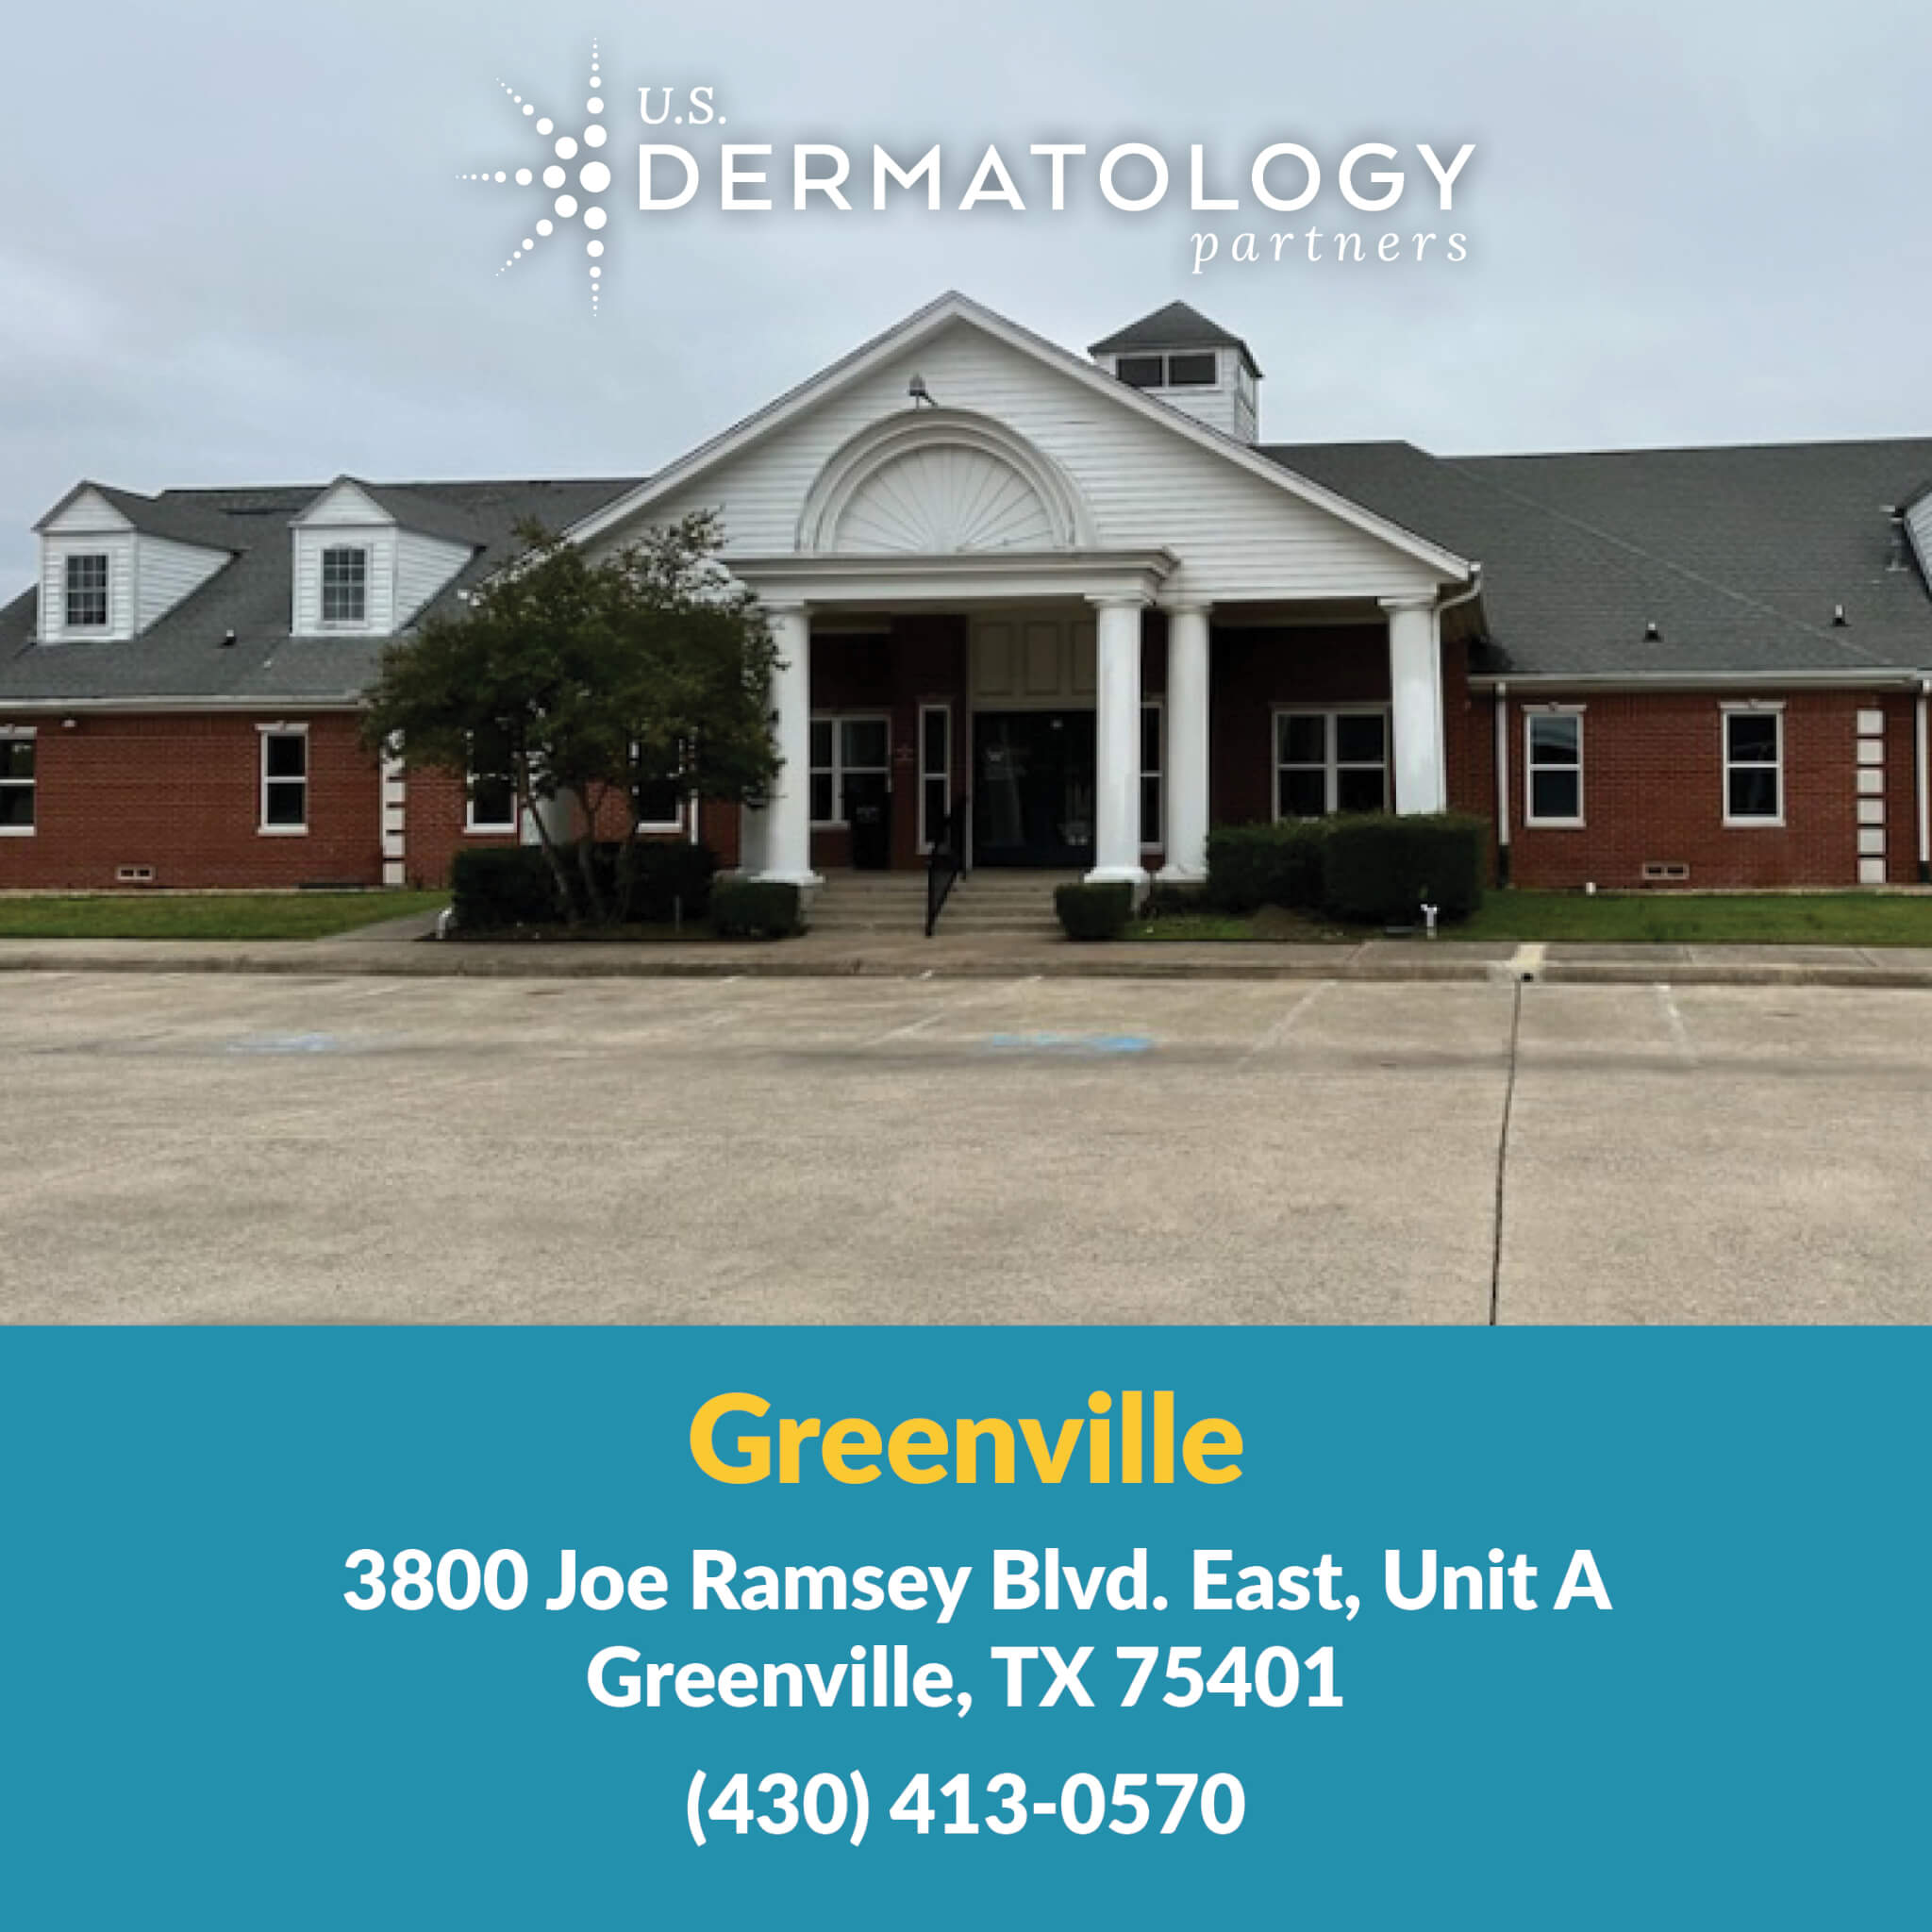 U.S. Dermatology Partners is your specialty dermatologist in Greenville, Texas. We offer treatment for acne, eczema, skin cancer, & more.